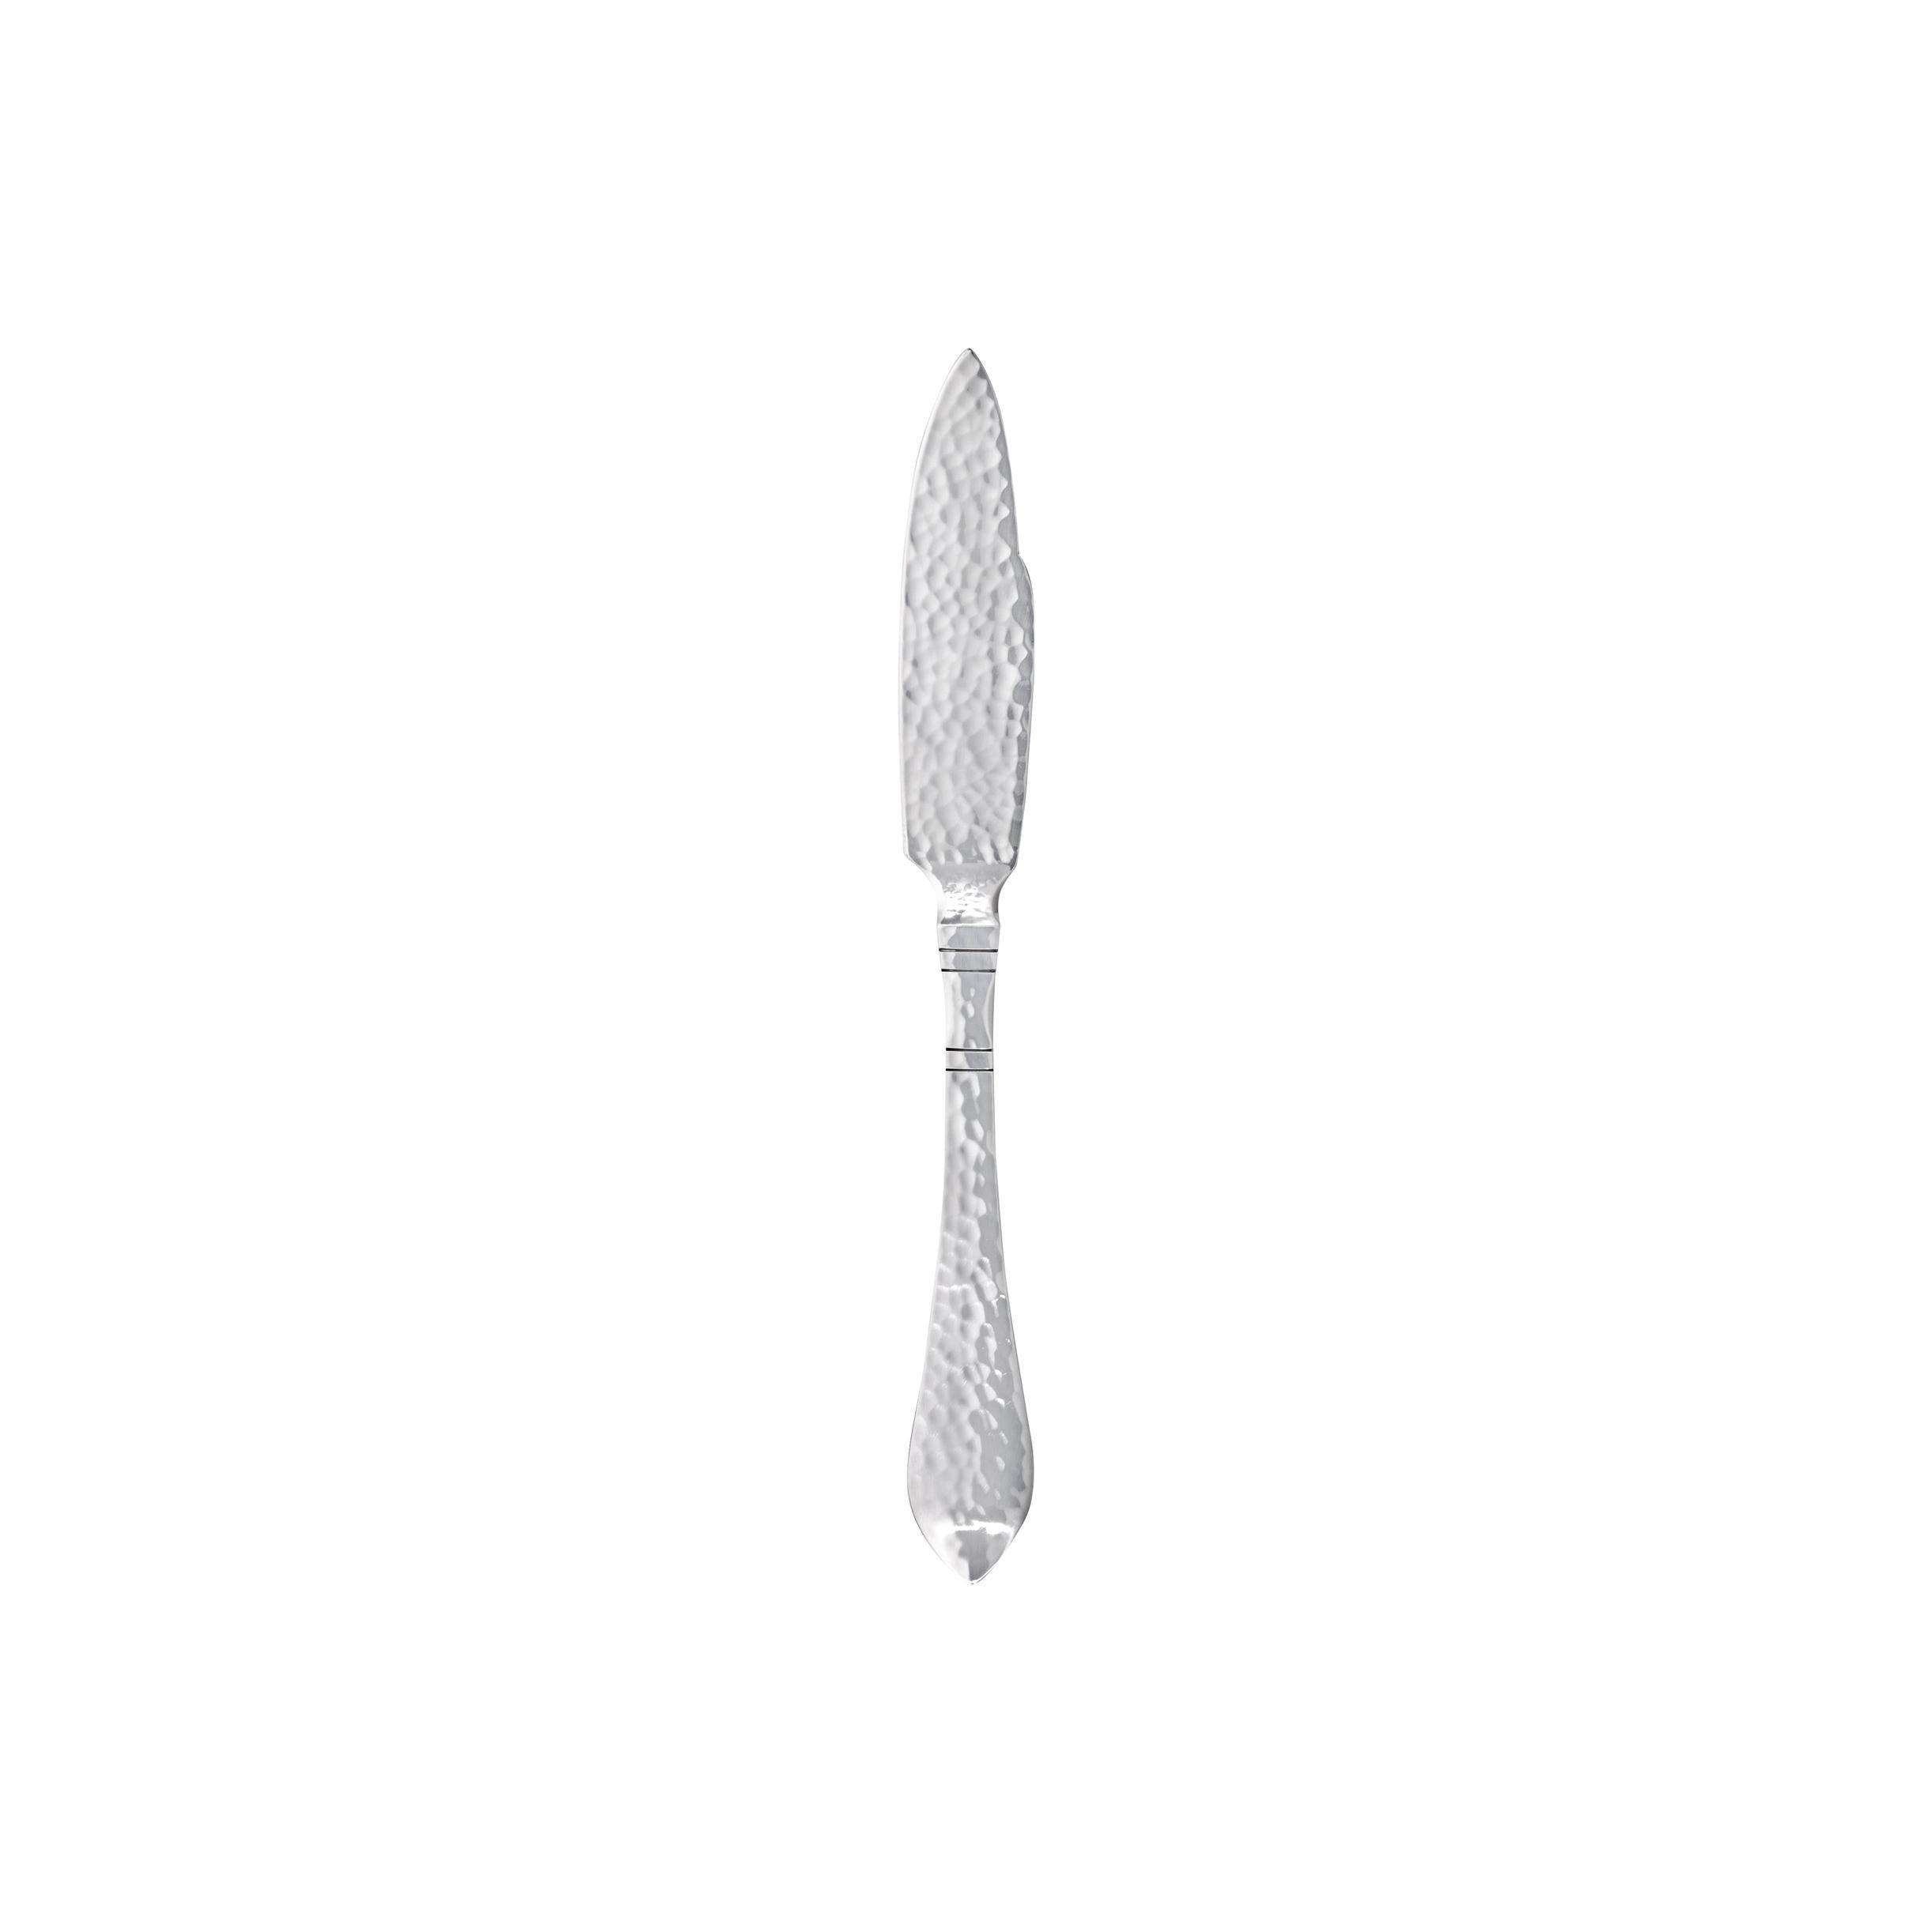 Georg Jensen Handcrafted Sterling Silver Continental Fish Knife